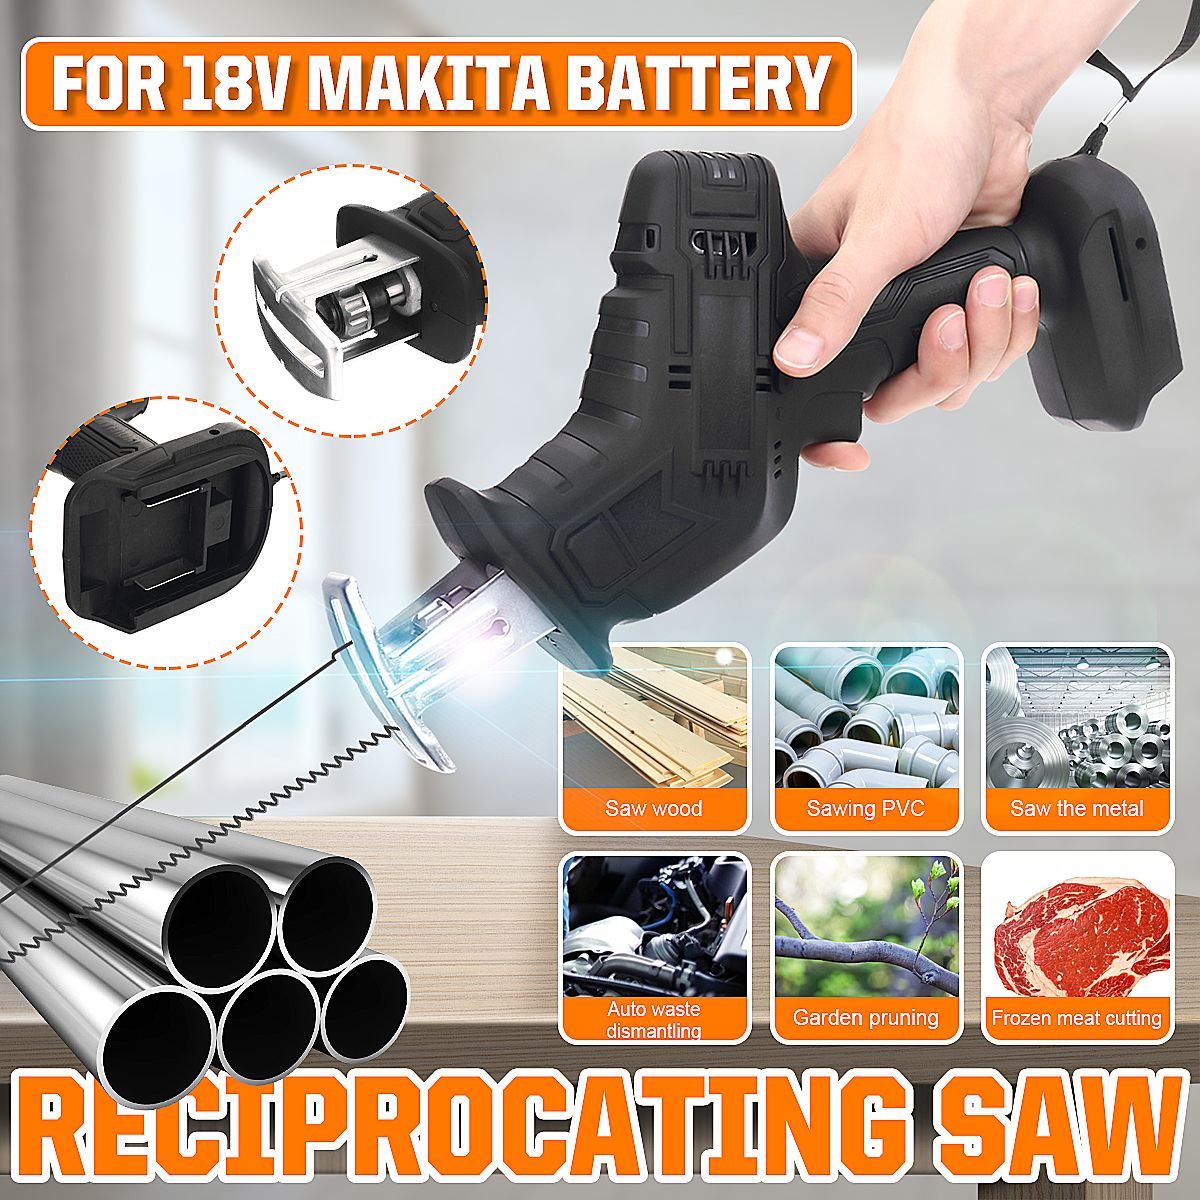 18V-Cordless-Electric-Reciprocating-Saw-Replacement-For-Makita-18V-Battery-1679753